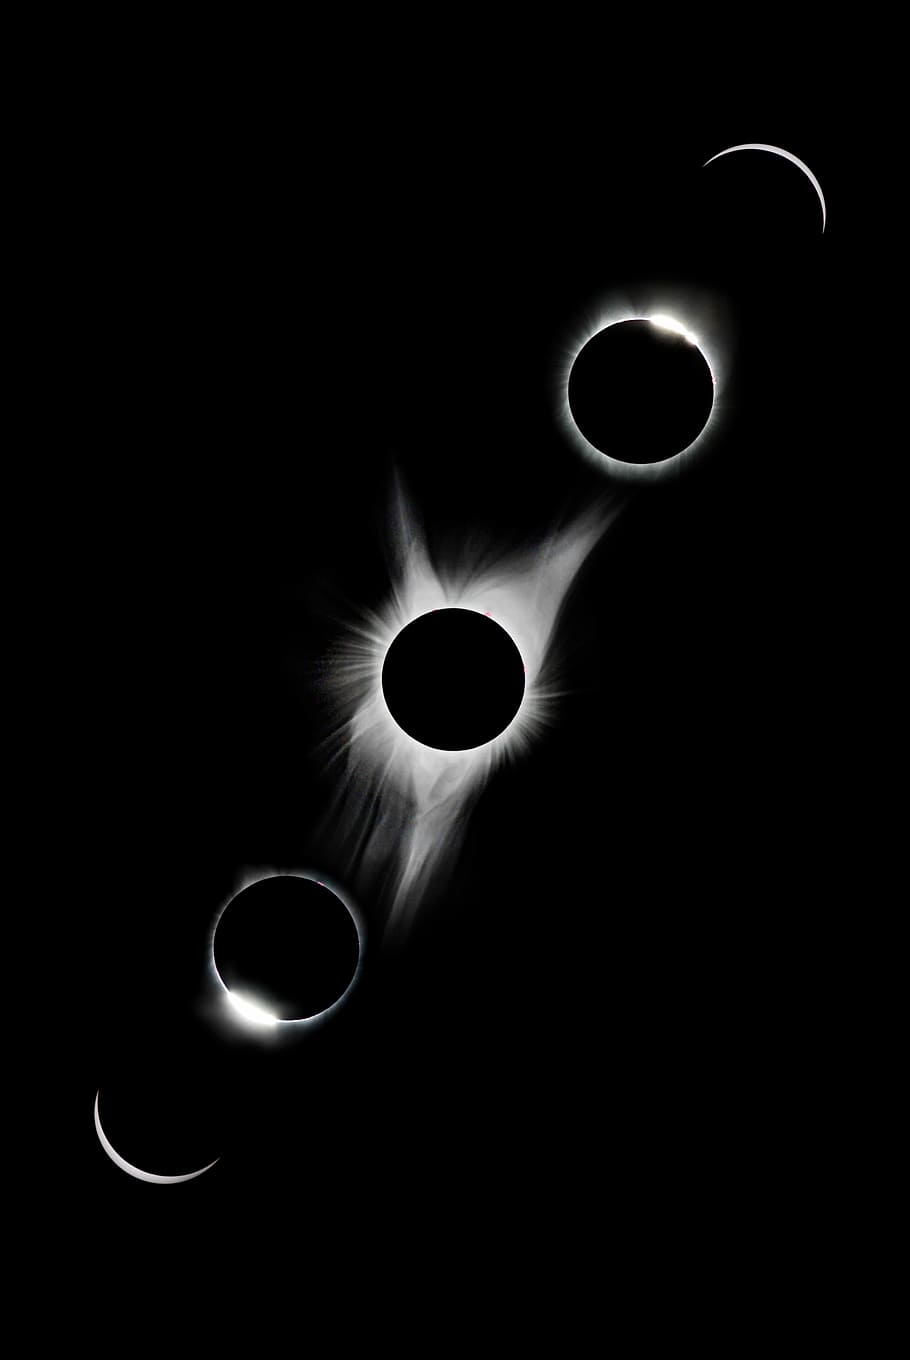 lunar eclipse, five eclipse phases, moon, moon eclipse, black and white, HD wallpaper